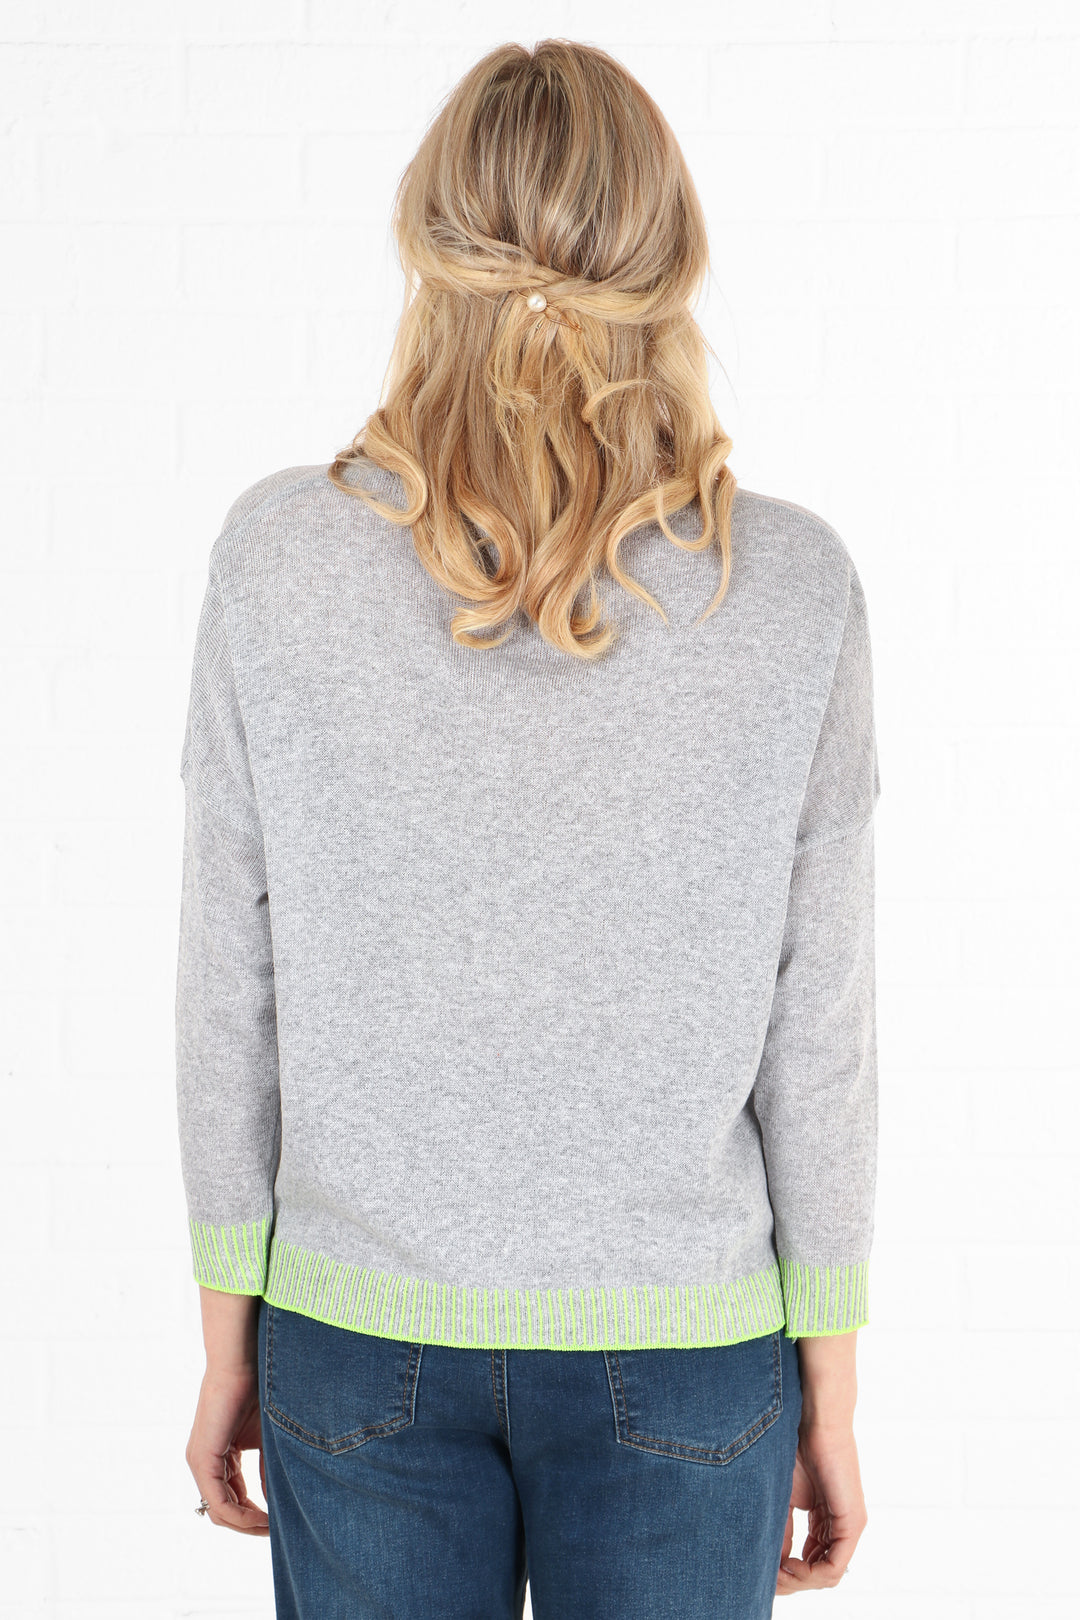 model showing the back of the light grey jumper